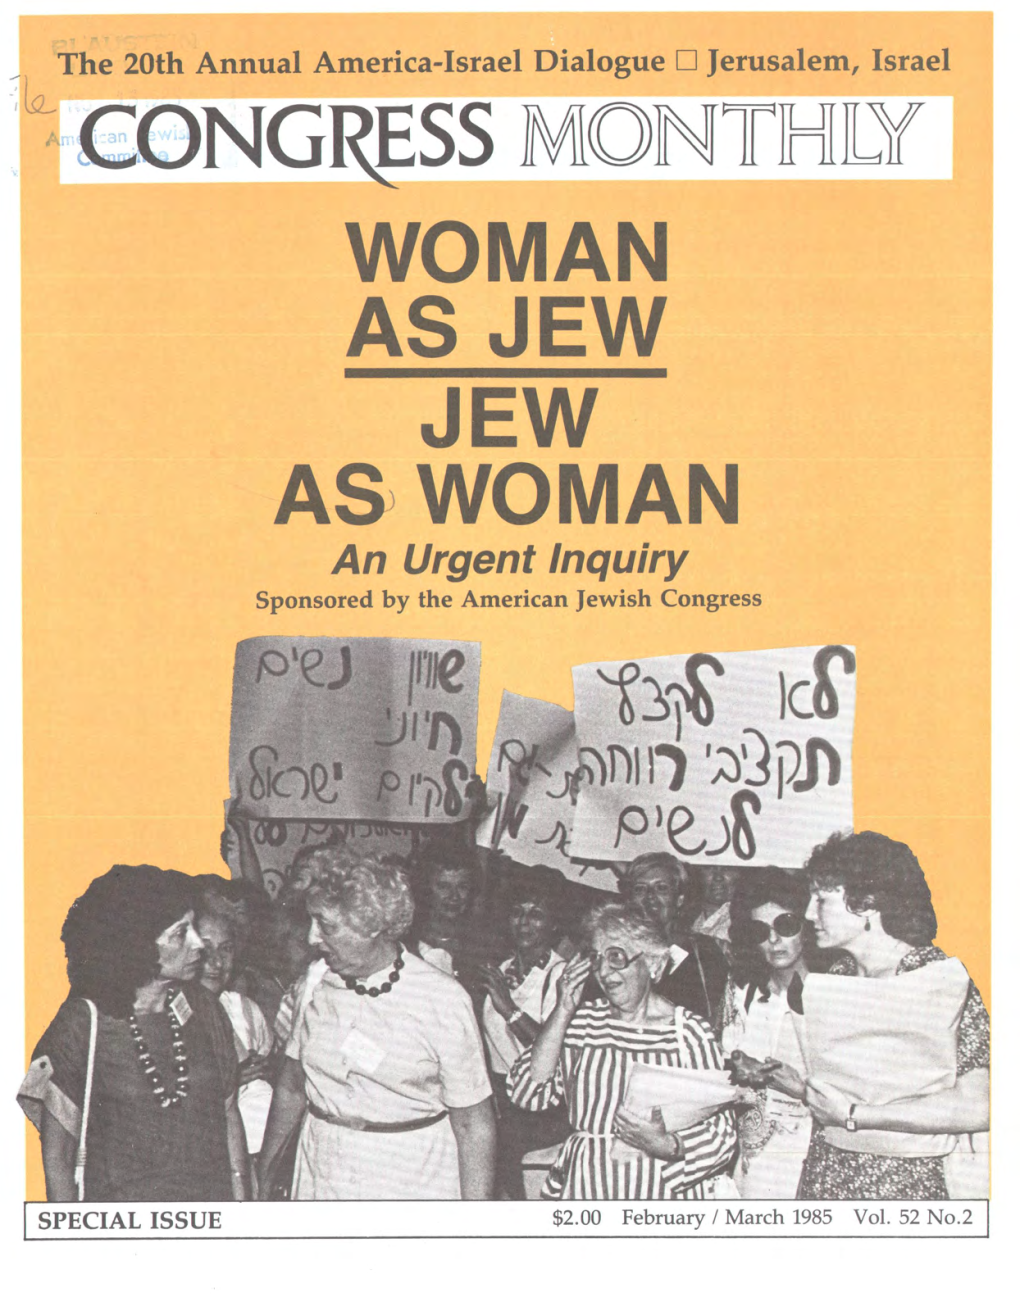 WOMAN AS JEW JEW AS WOMAN an Urgent Inquiry Sponsored by the American Jewish Congress